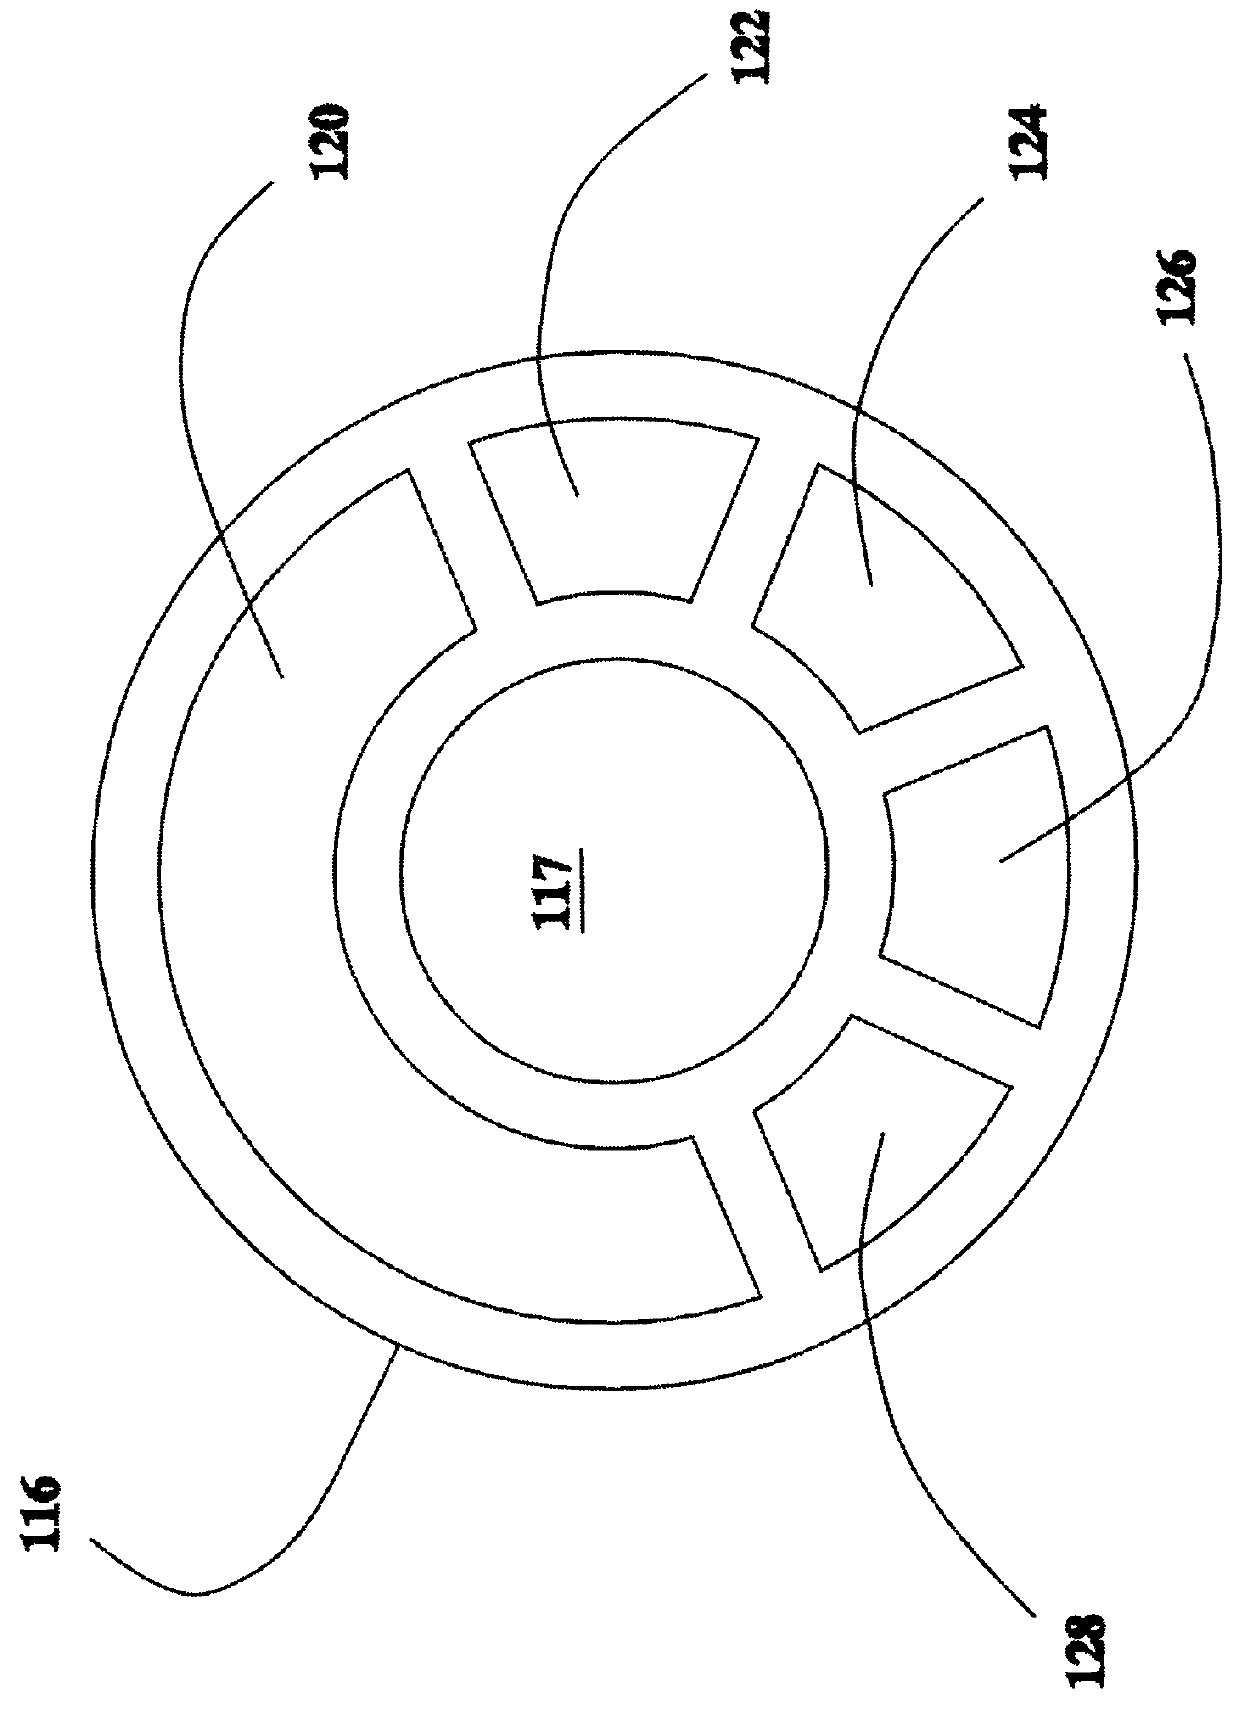 Key operated rotary switch for disabling an automobile air bag supplemental restraint system